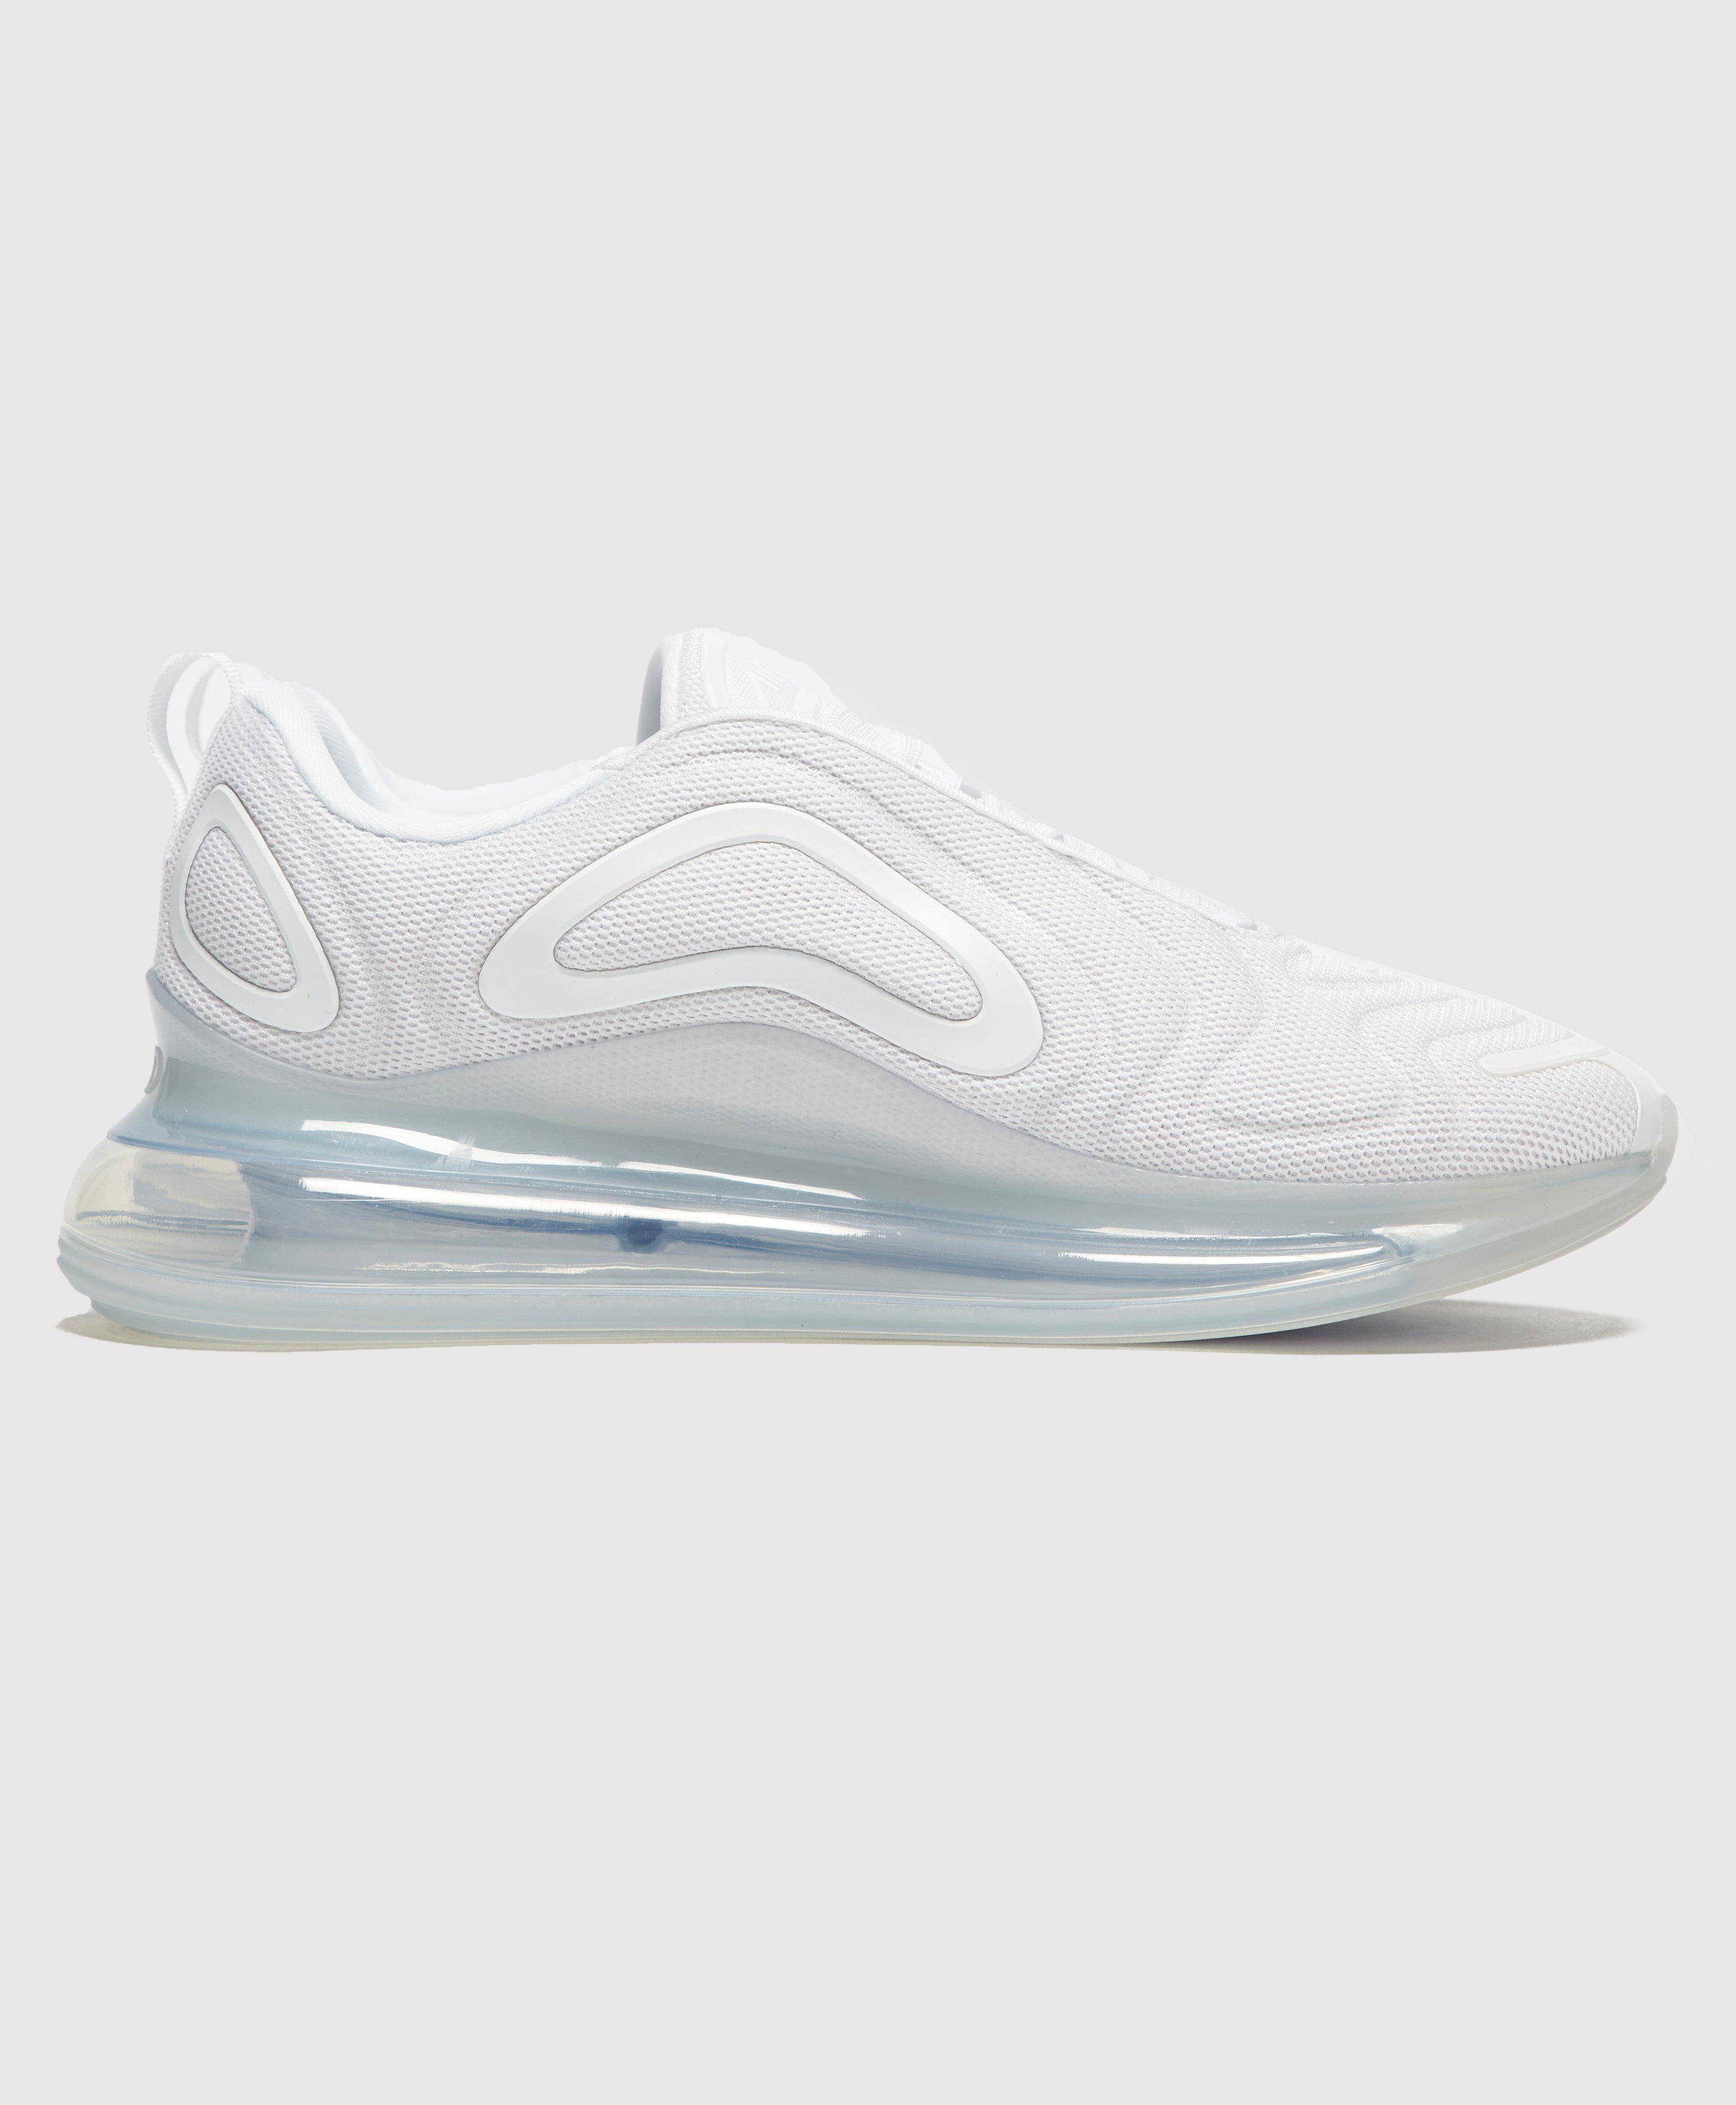 Nike Synthetic Air Max 720 - Shoes in White/White/Metallic Platinum (White)  for Men | Lyst